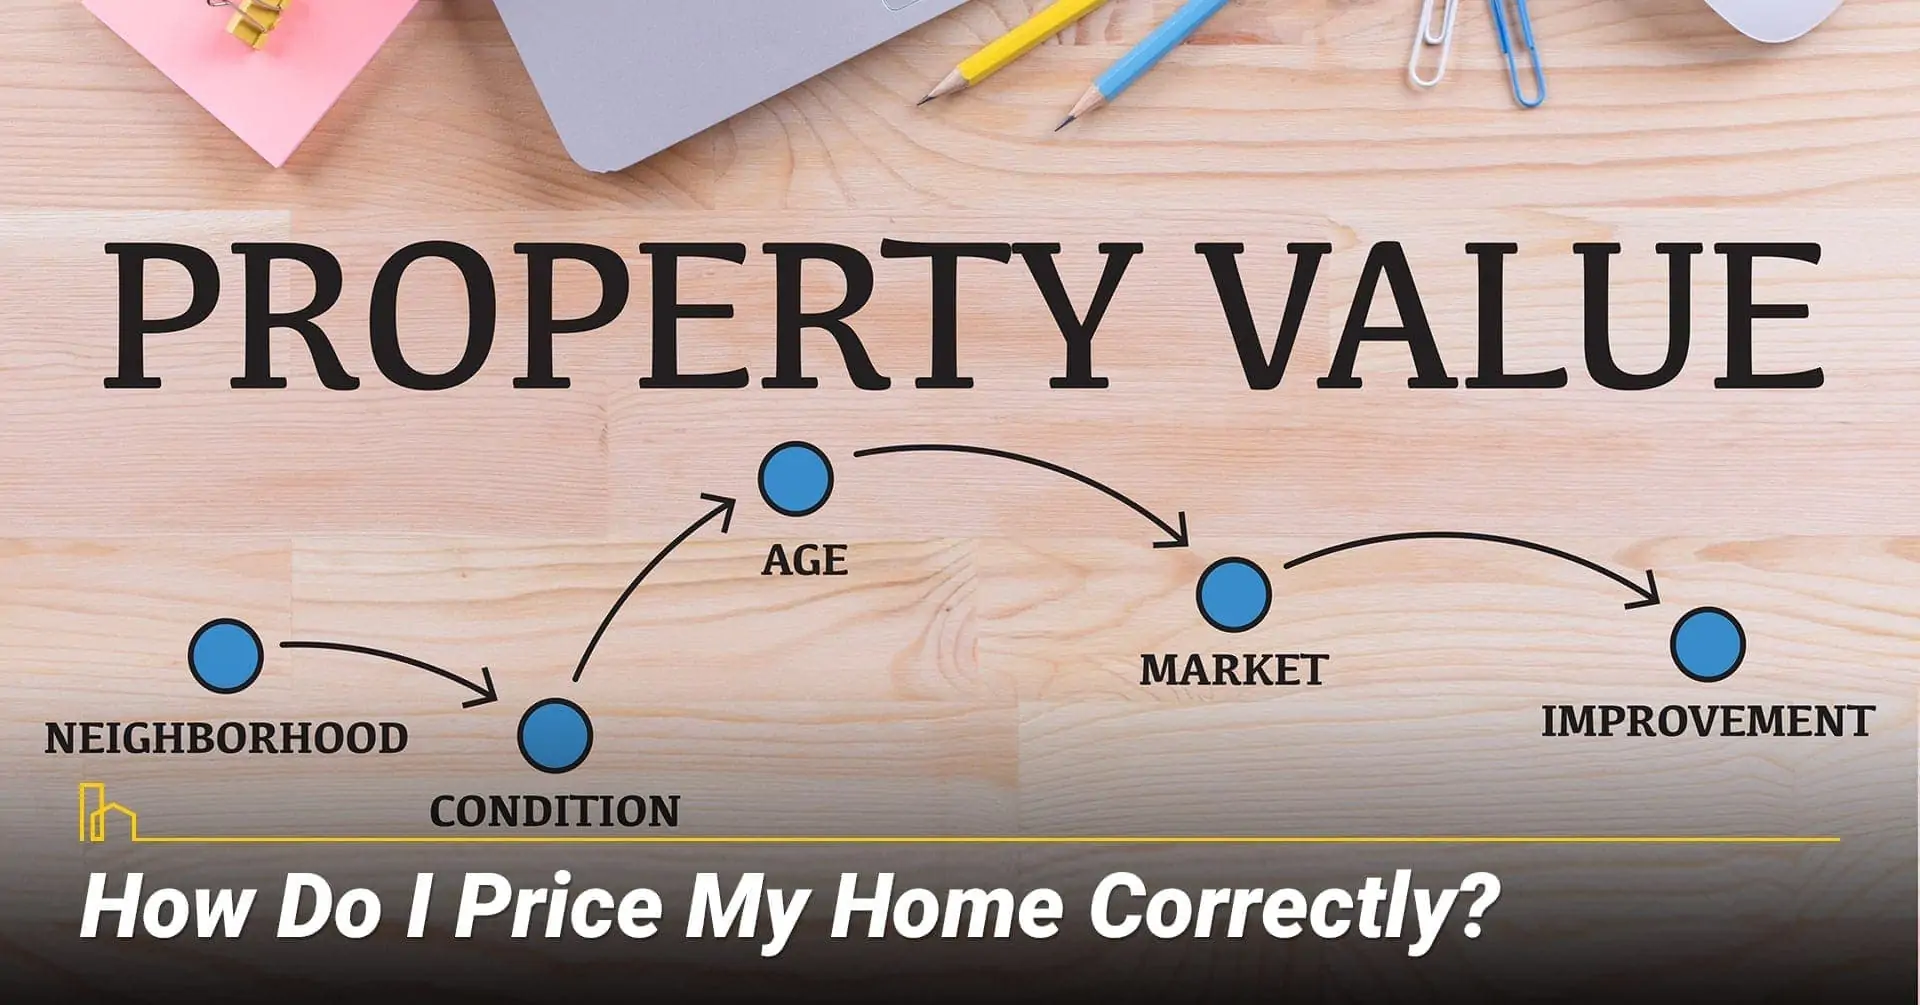 How Do I Price My Home Correctly? Asking for the right amount for your home